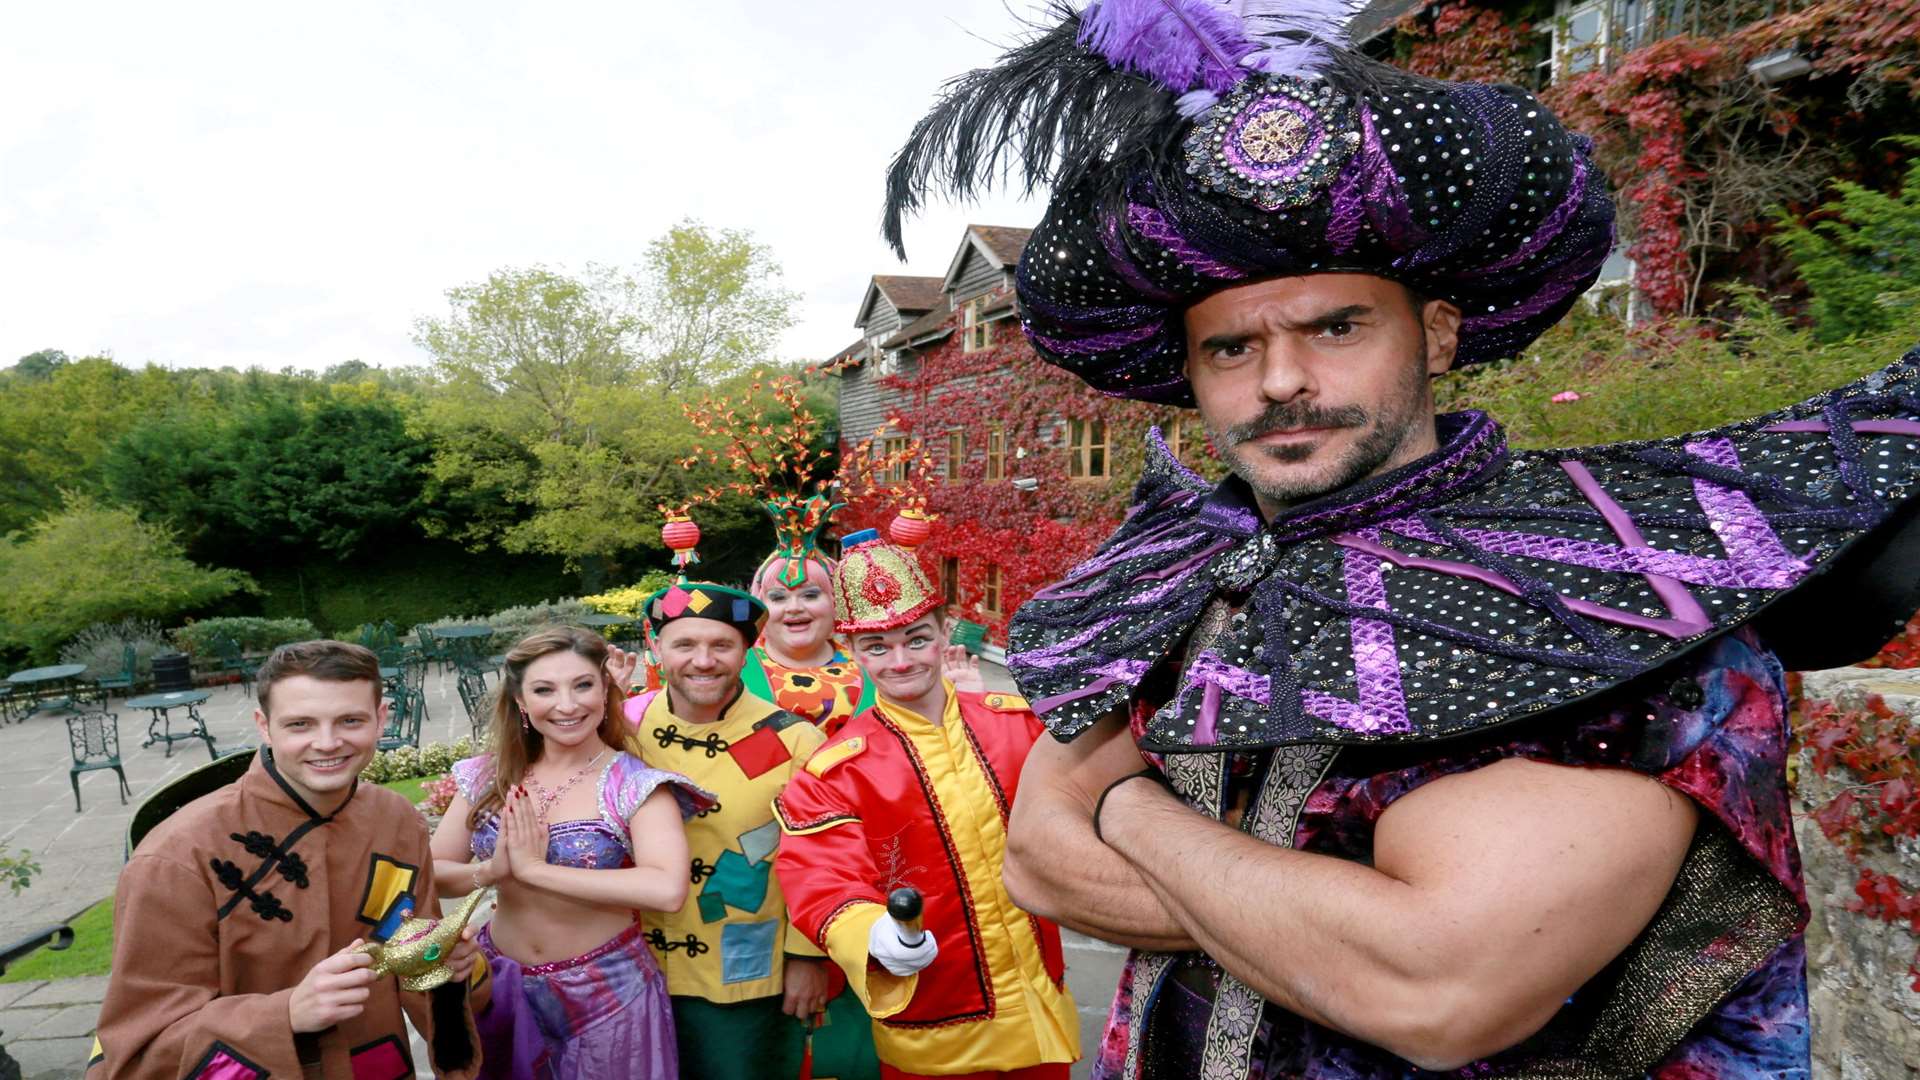 The cast of this year's panto Aladdin at the Assembly Halls in Tunbridge Wells, starring Michael Greco, right